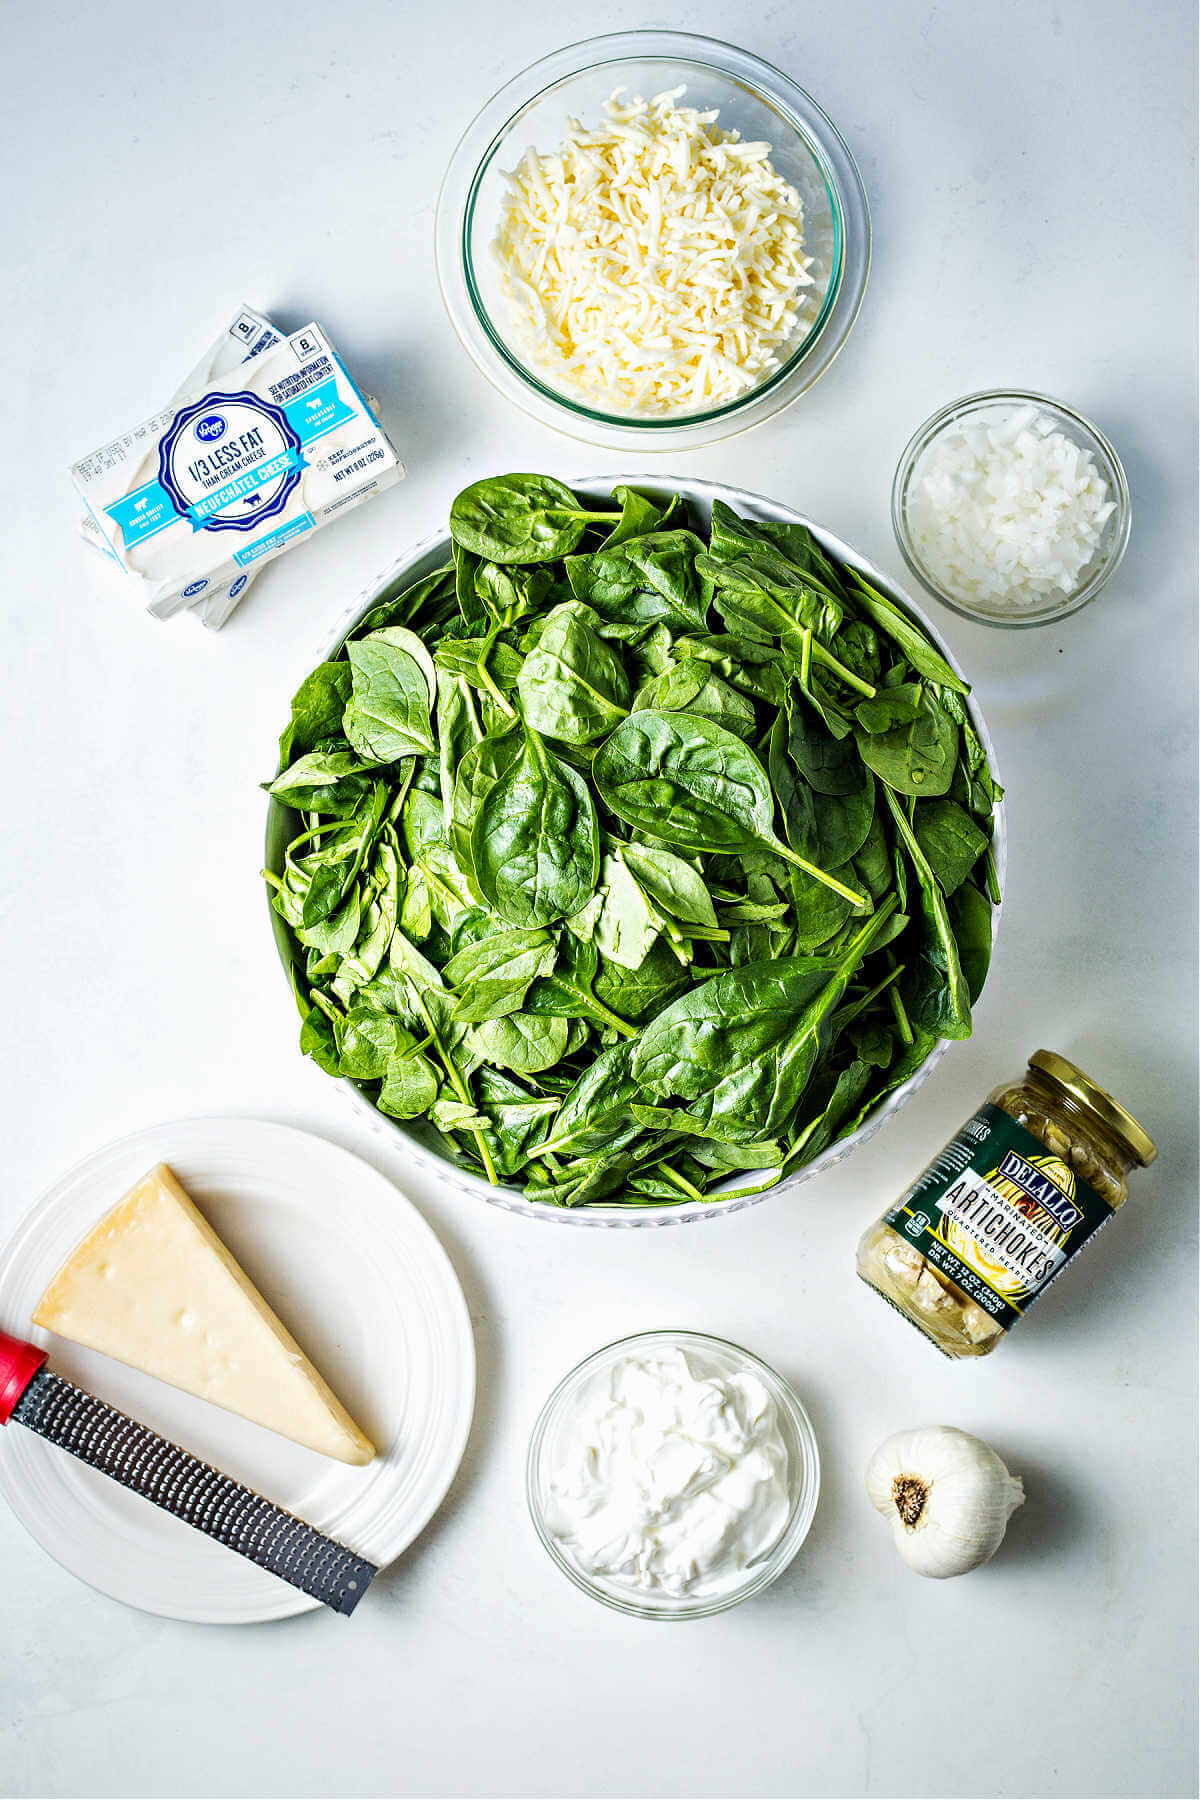 ingredients for slow cooker spinach artichoke dip on a table.